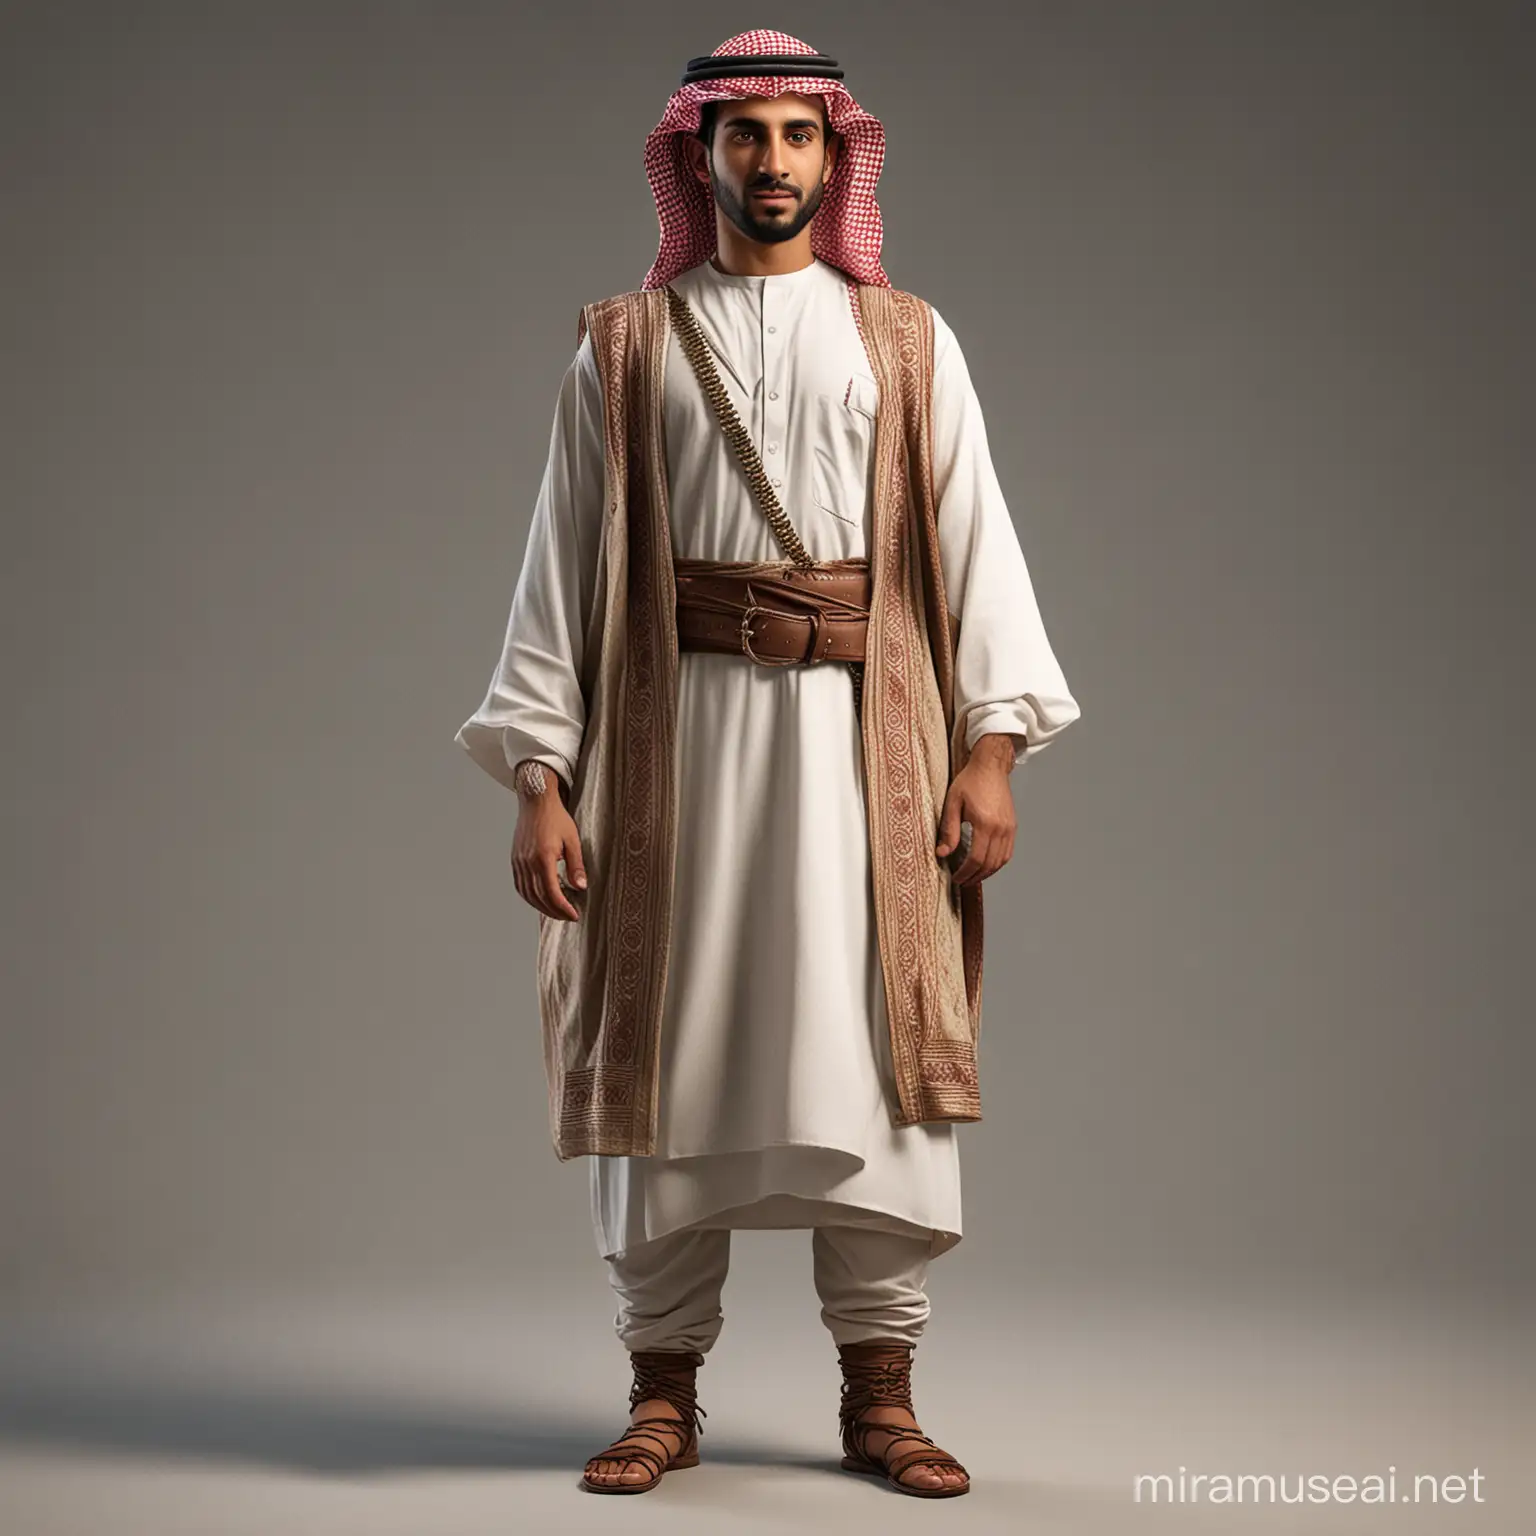 Saudi Man in Traditional Thobe Authentic FullLength 3D Render with Plain Background